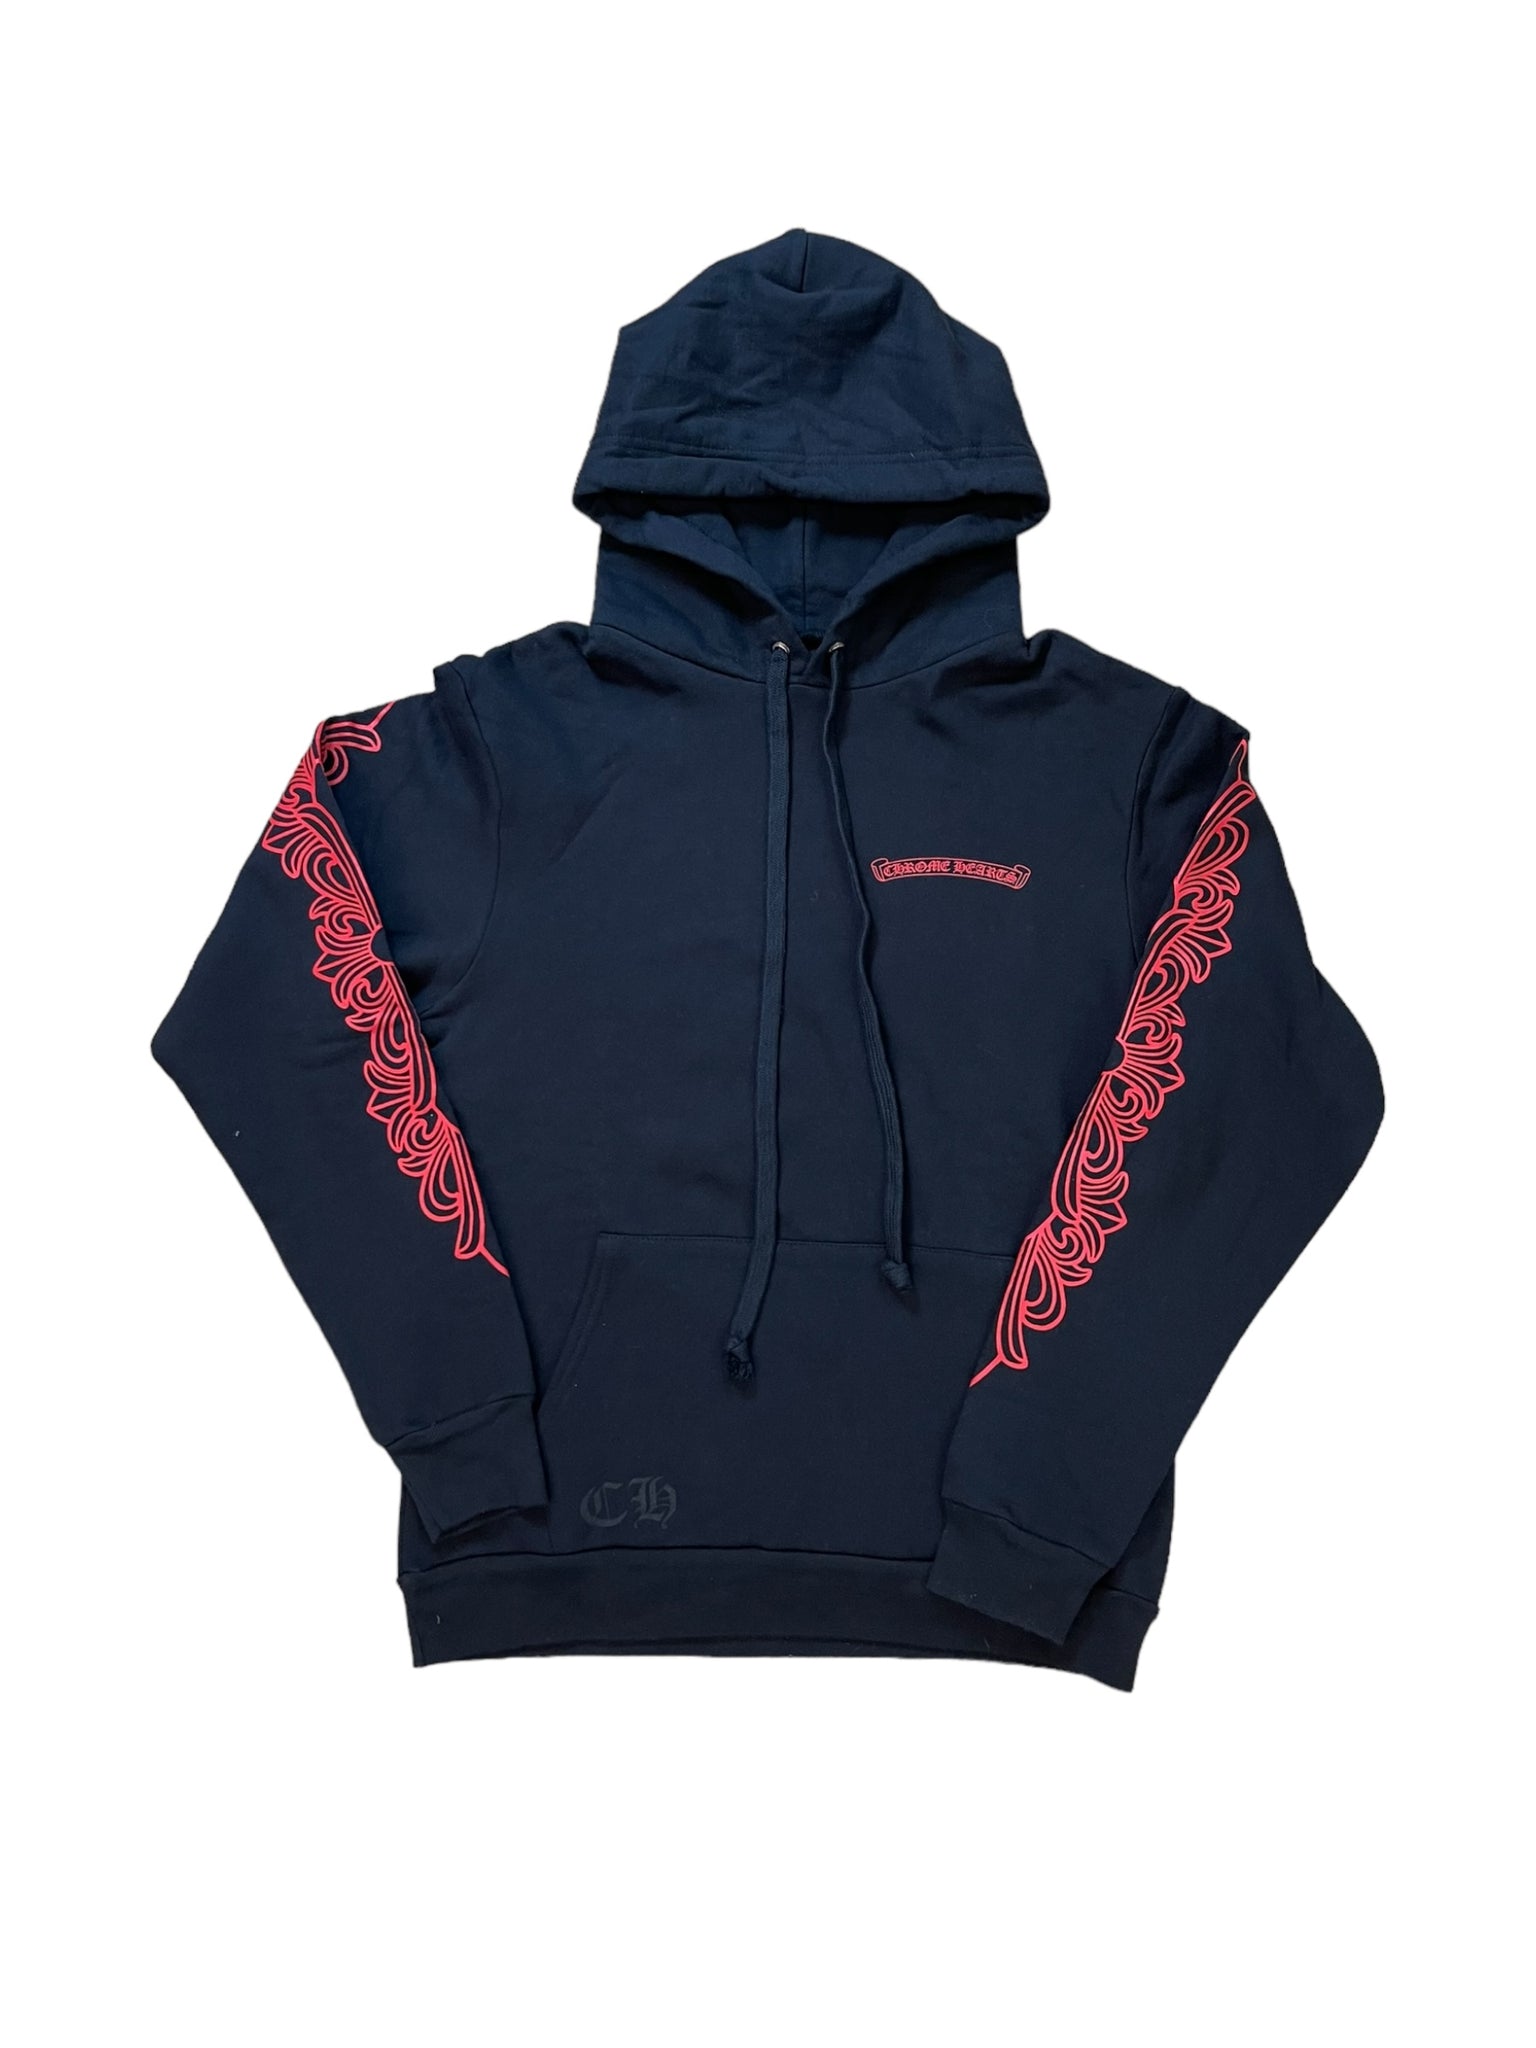 Chrome Hearts Horseshoe Red Floral Hoodie "Black"